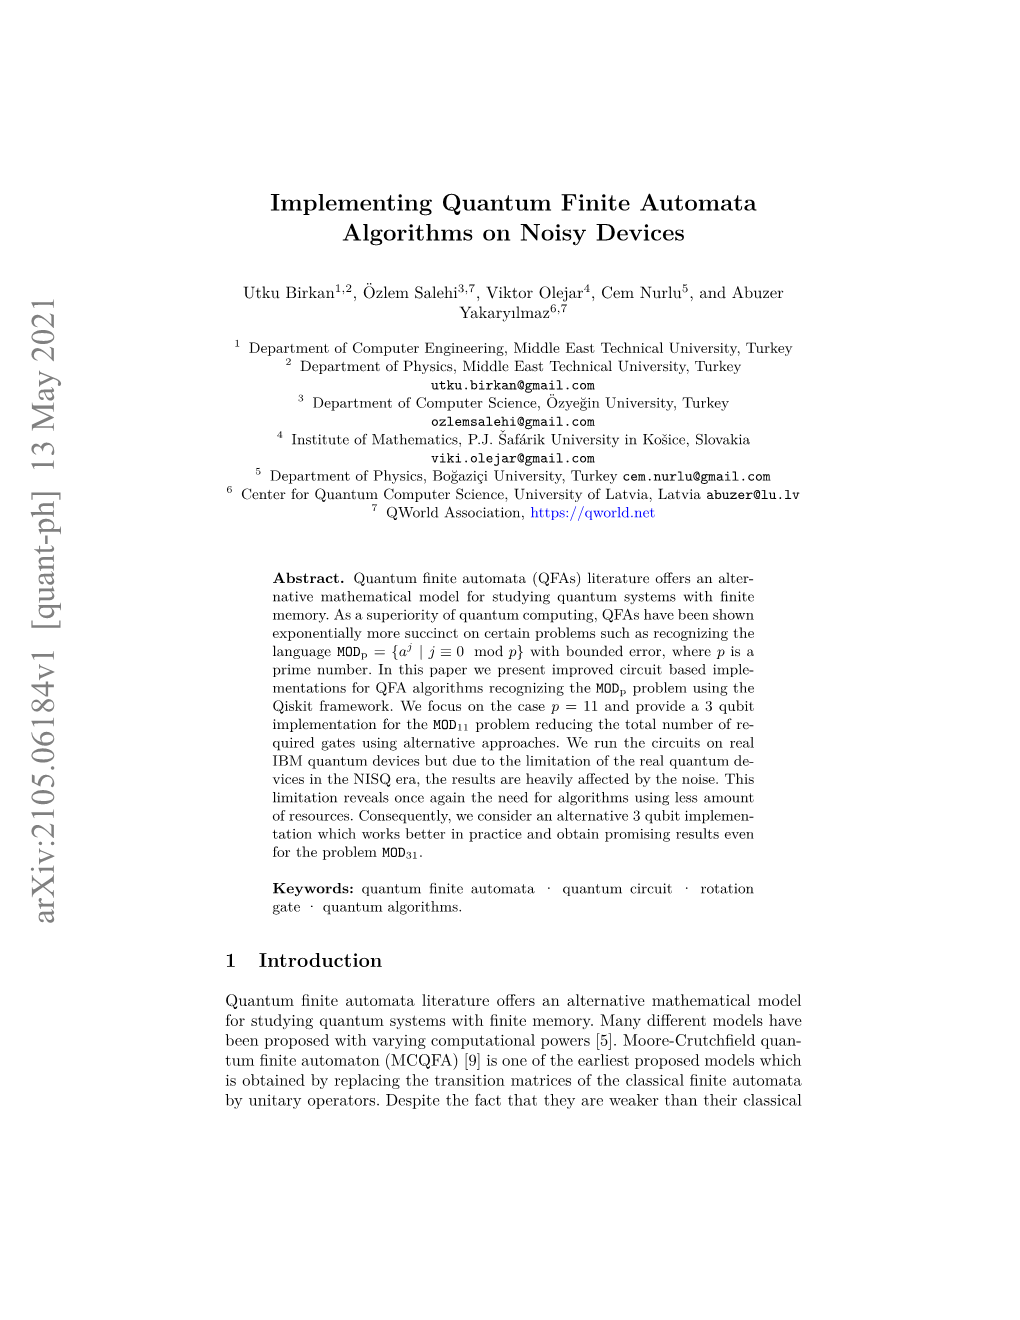 Implementing Quantum Finite Automata Algorithms on Noisy Devices 3 Most Restricted Model Called As Moore-Crutchﬁeld Quantum ﬁnite Automaton (MCQFA) Model [9]